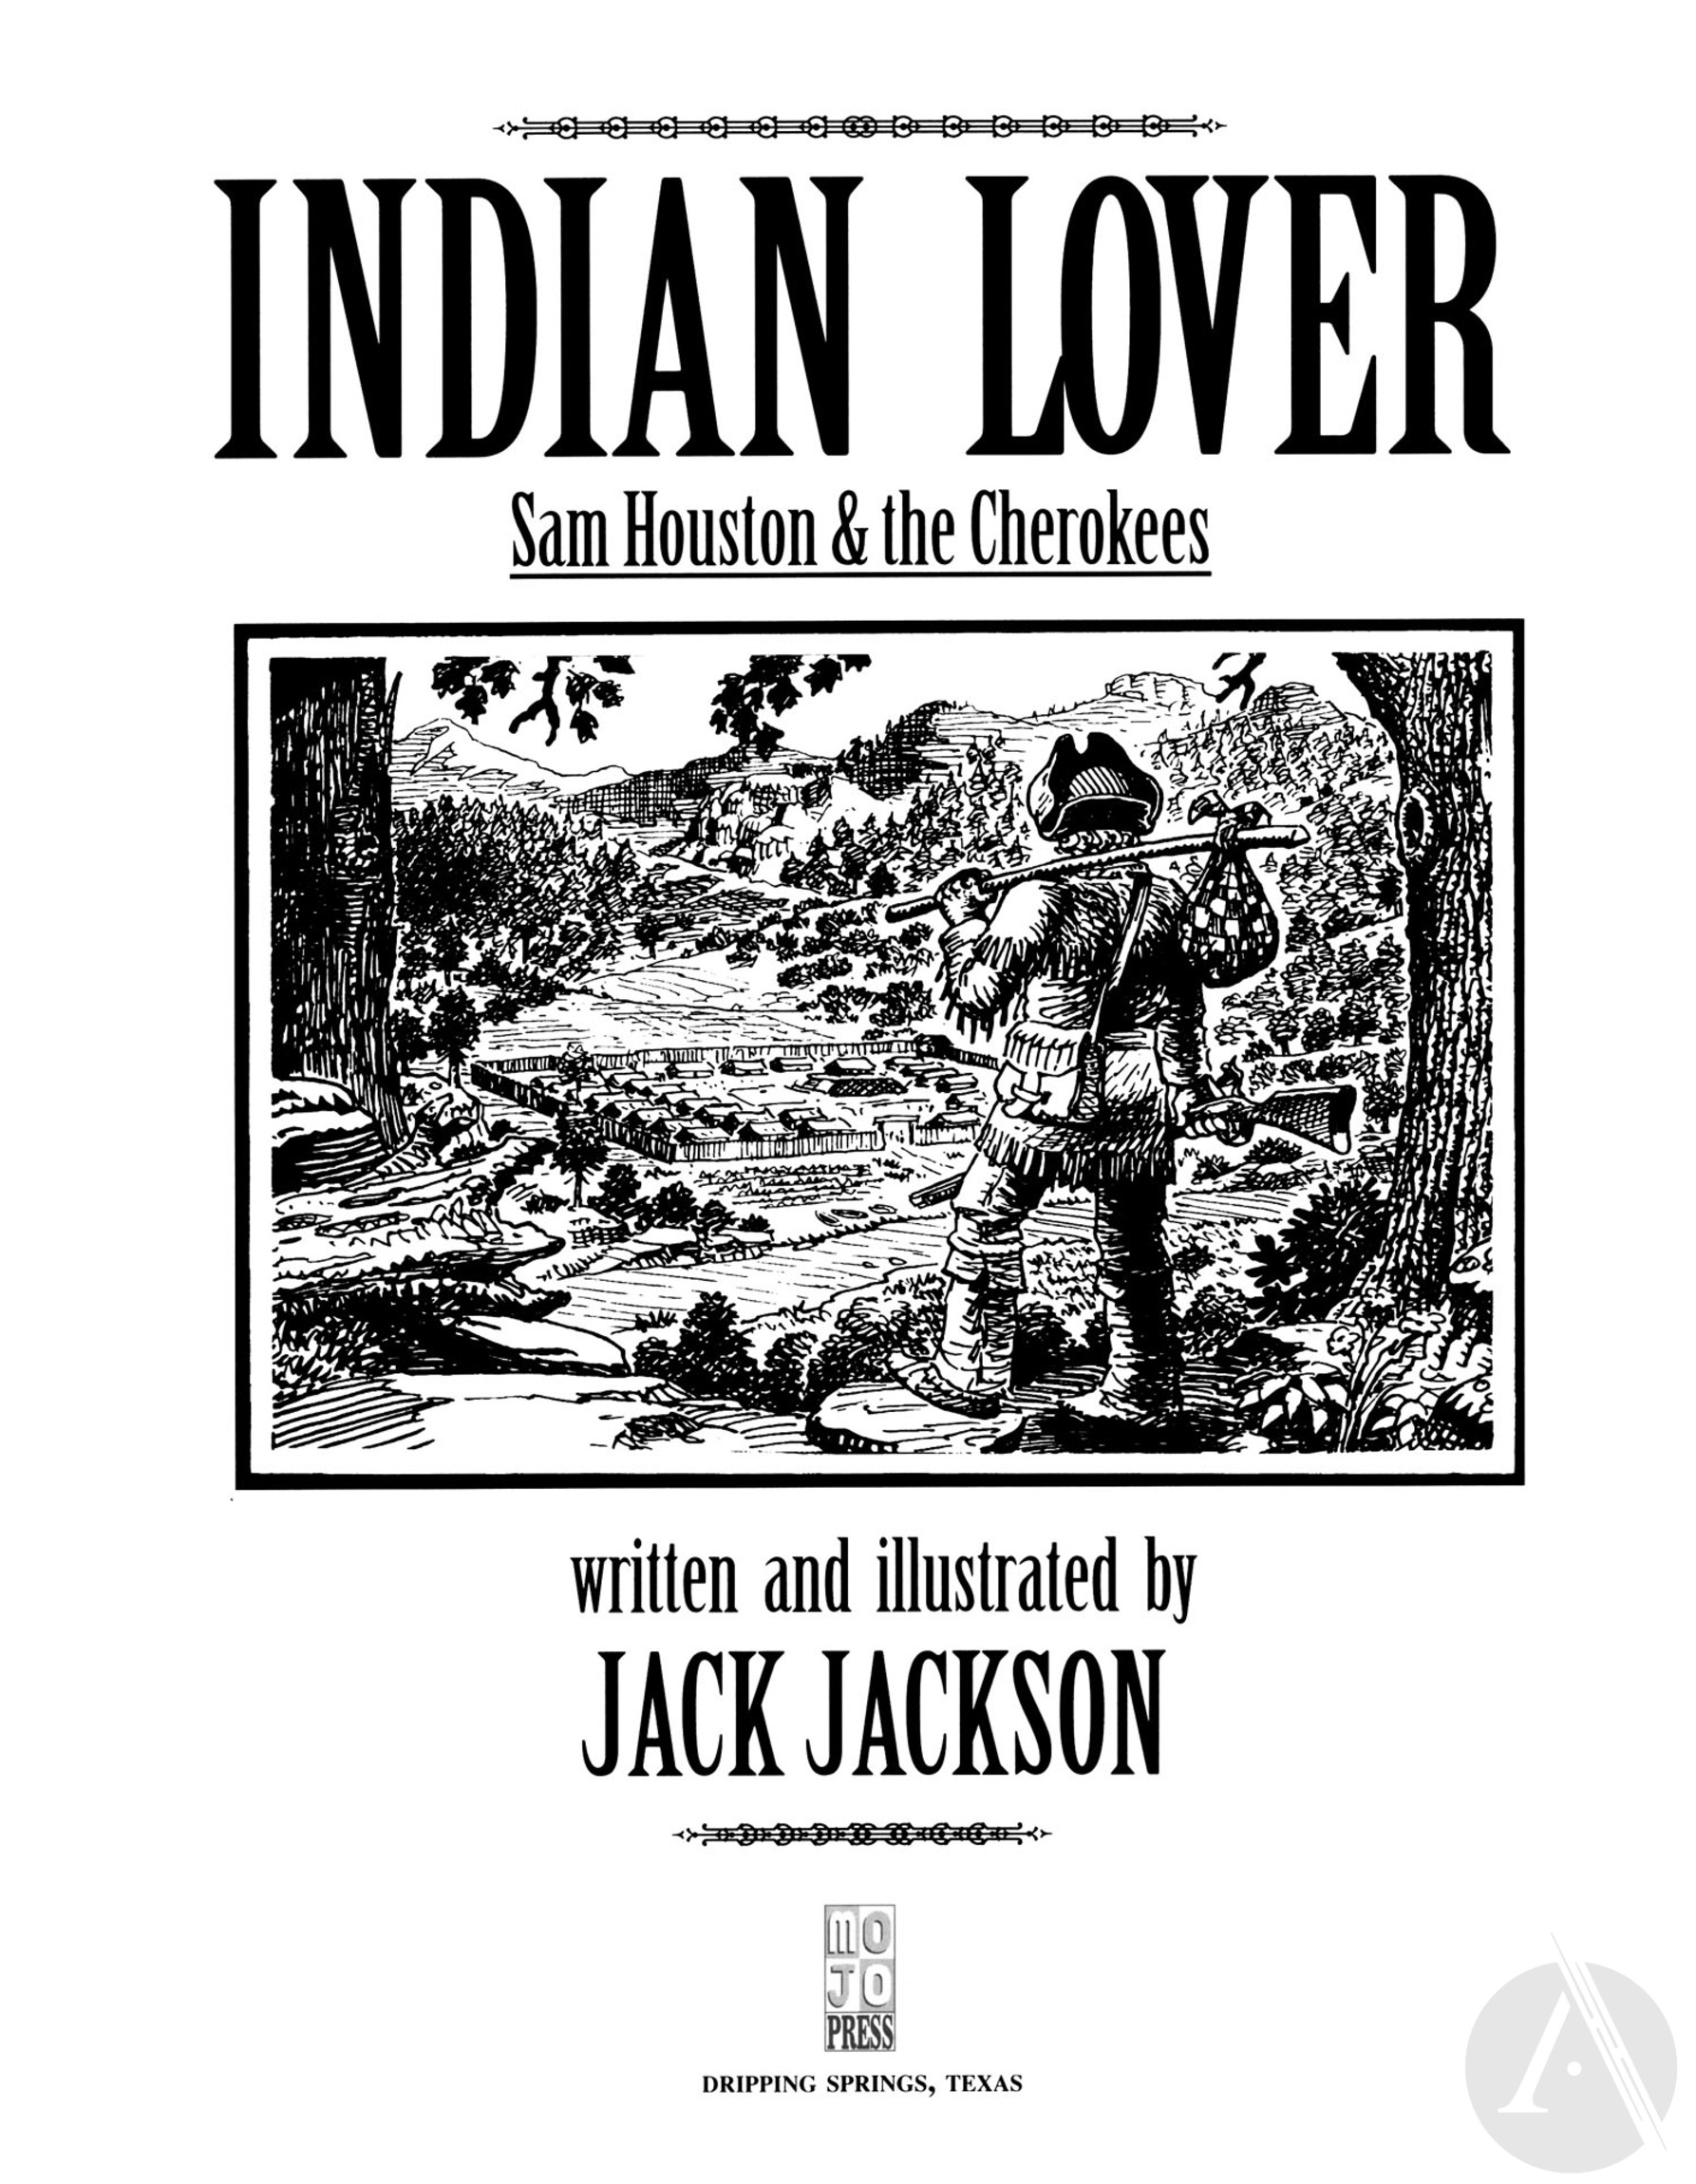 Read online Indian Lover: Sam Houston & the Cherokees comic -  Issue # TPB - 5